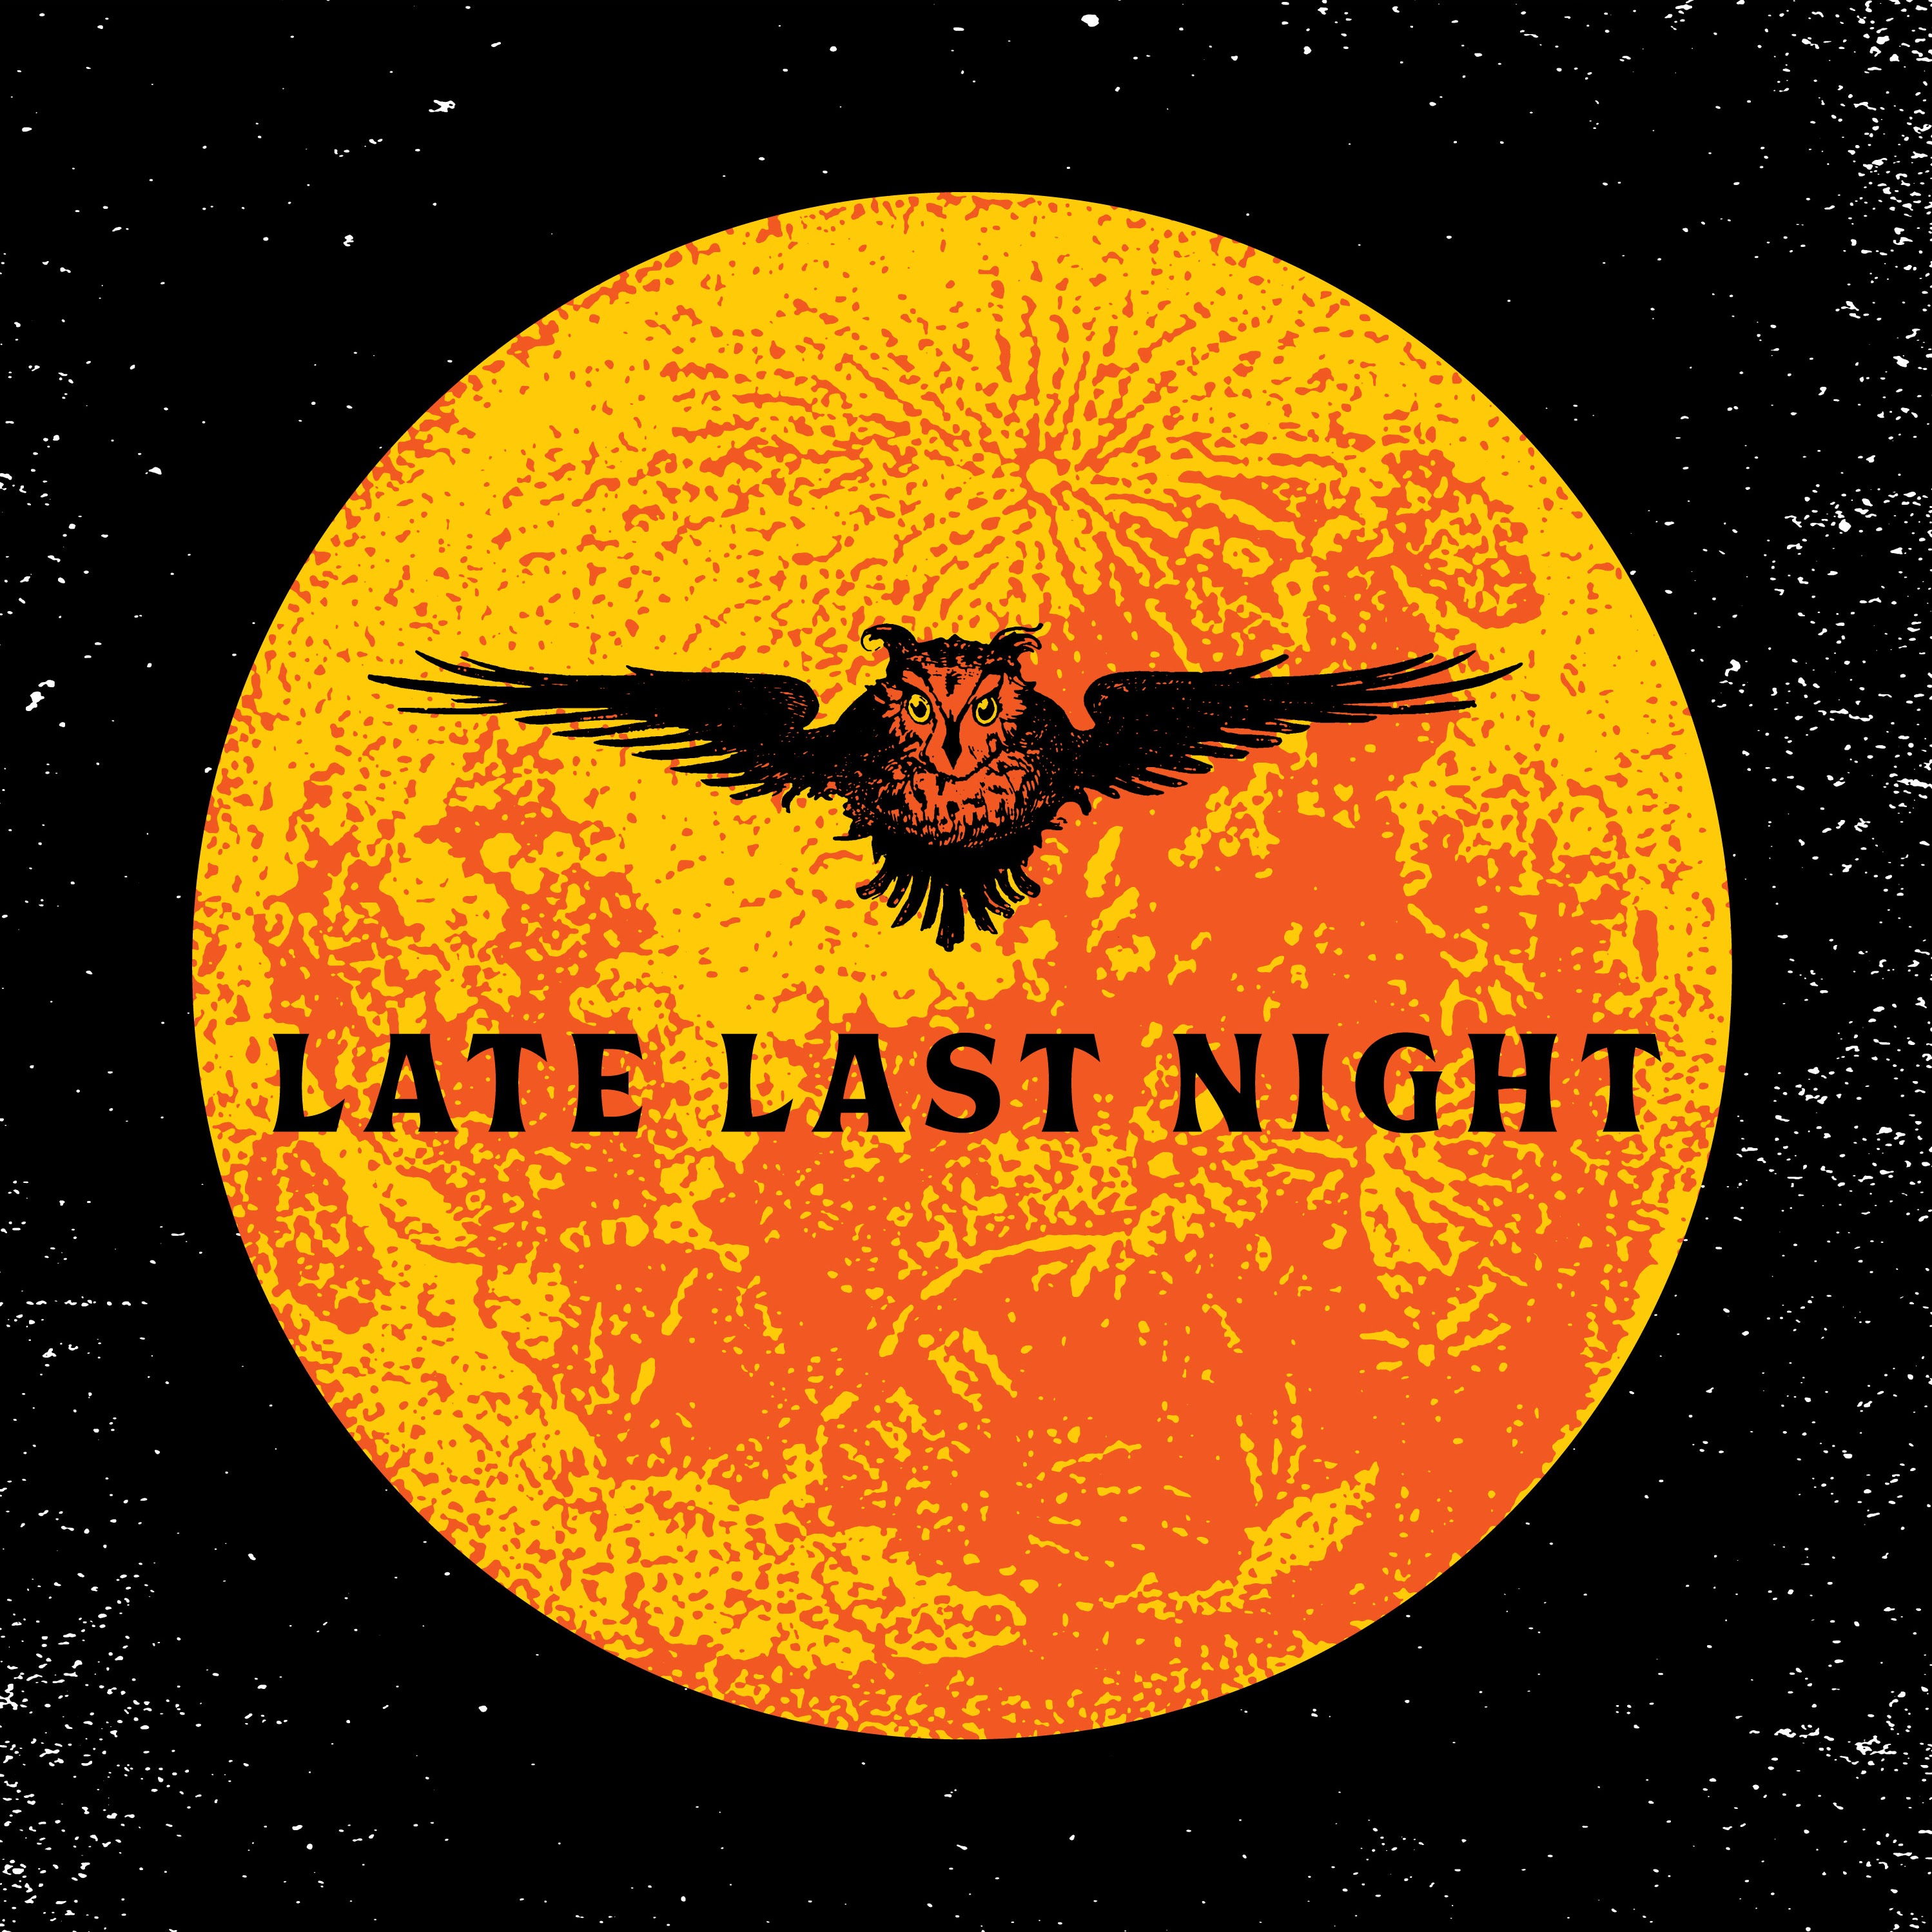 The Mighty Pines release new single "Late Last Night"